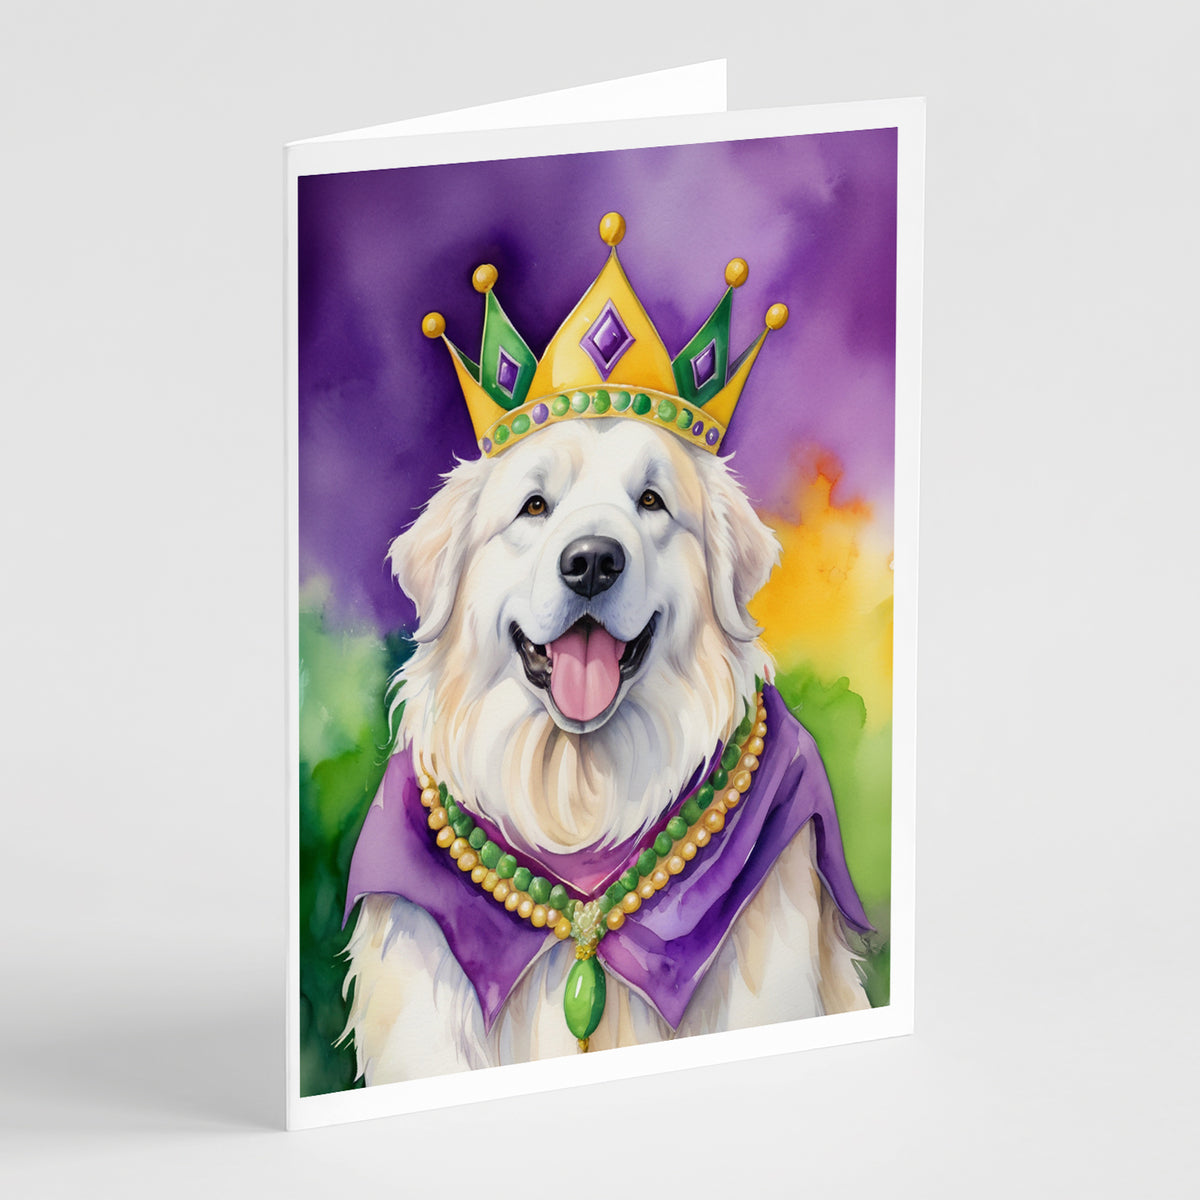 Buy this Great Pyrenees King of Mardi Gras Greeting Cards Pack of 8